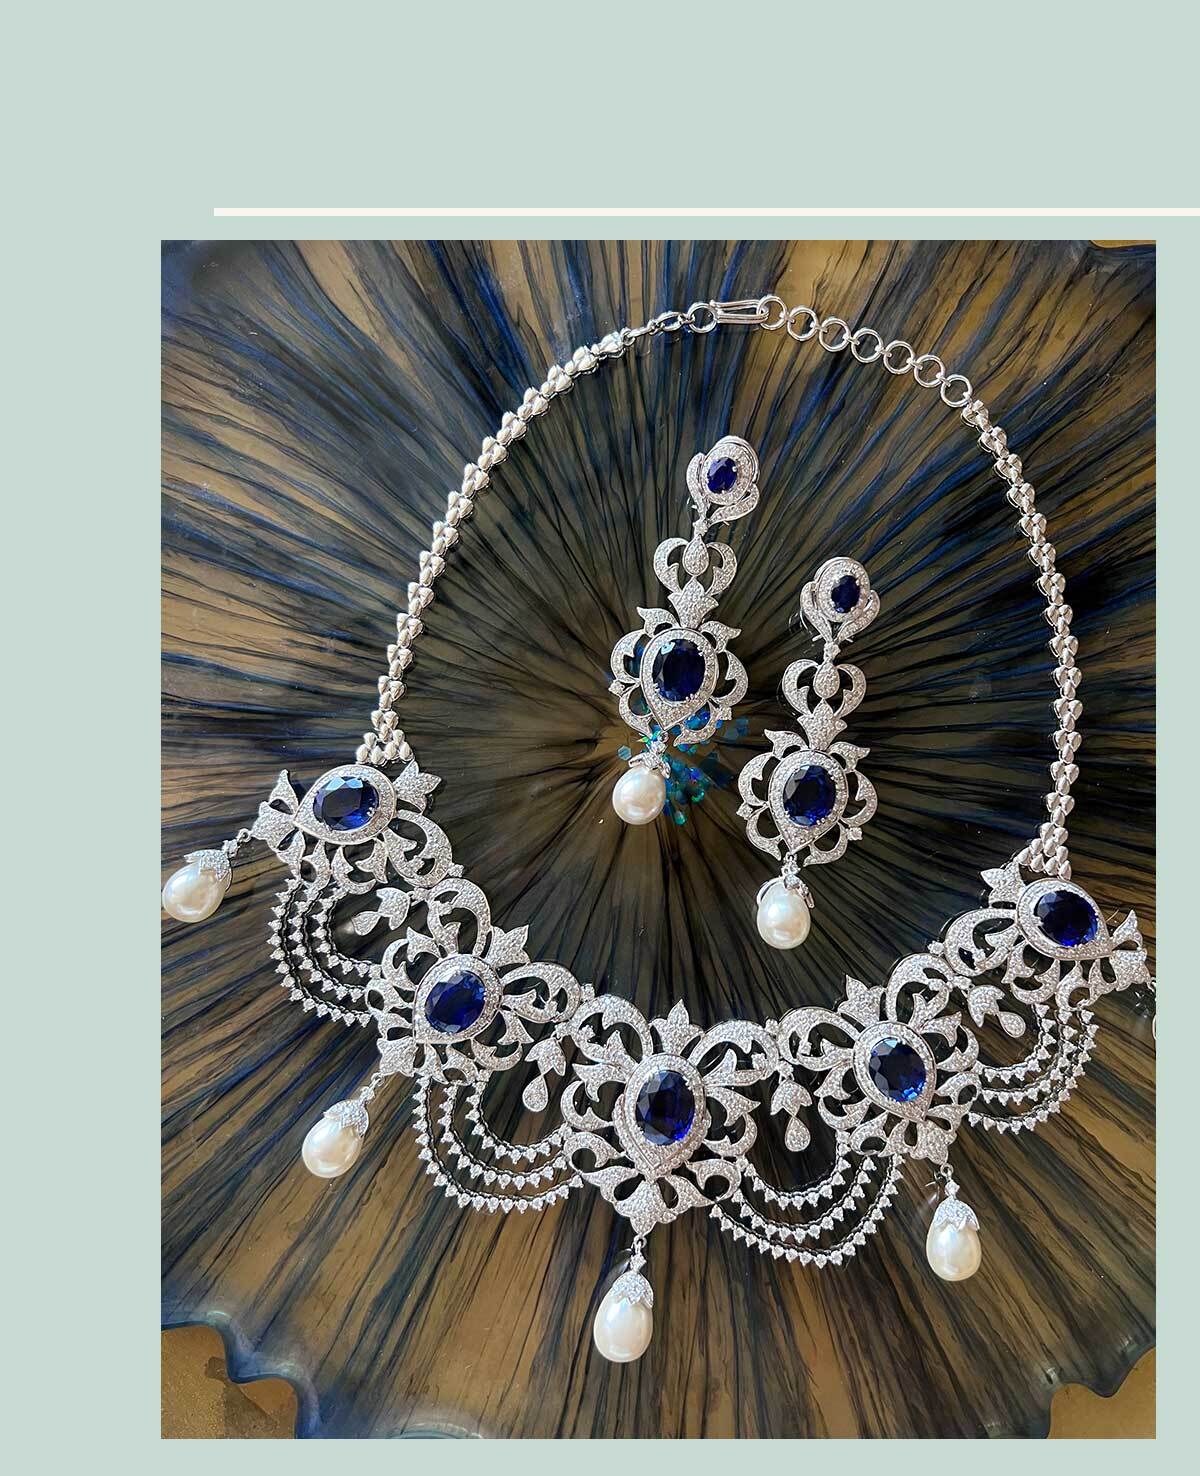 Re-Imagined Heirloom Necklace: Sparkling Diamonds Circling Blue Sapphires